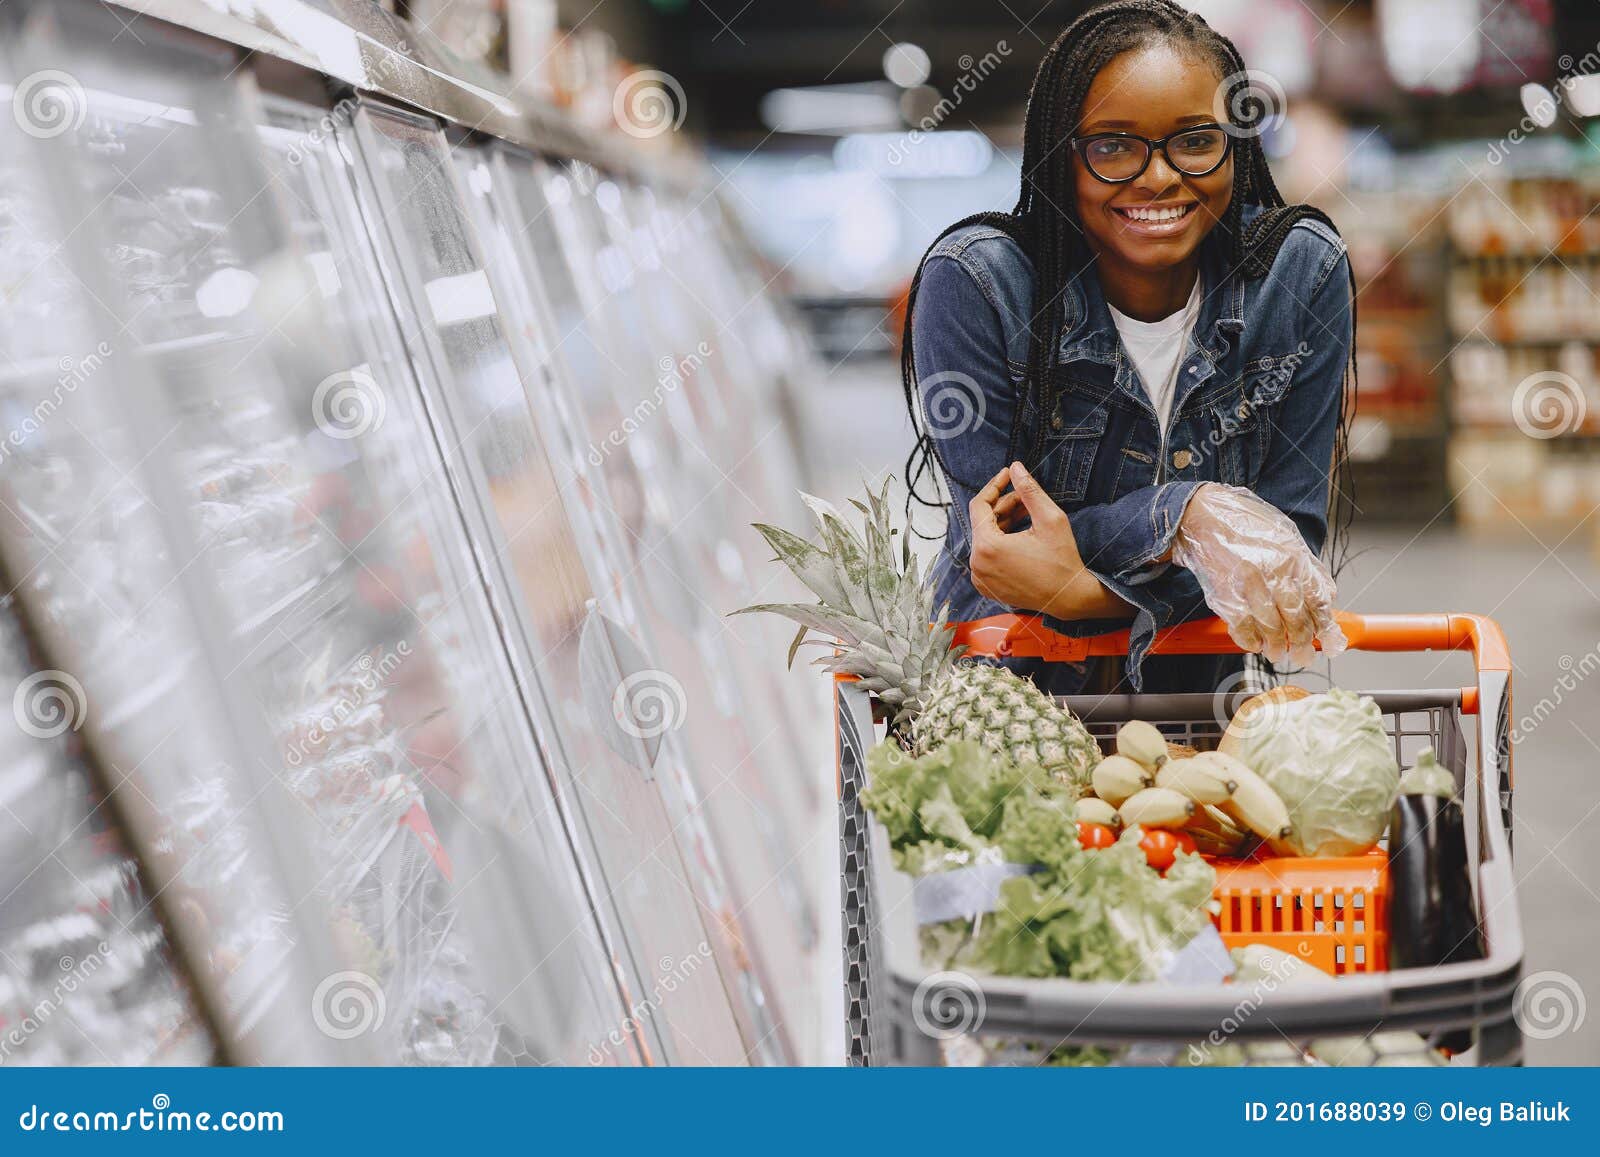 Woman Shopping Vegetables at the Supermarket Stock Image - Image of ...